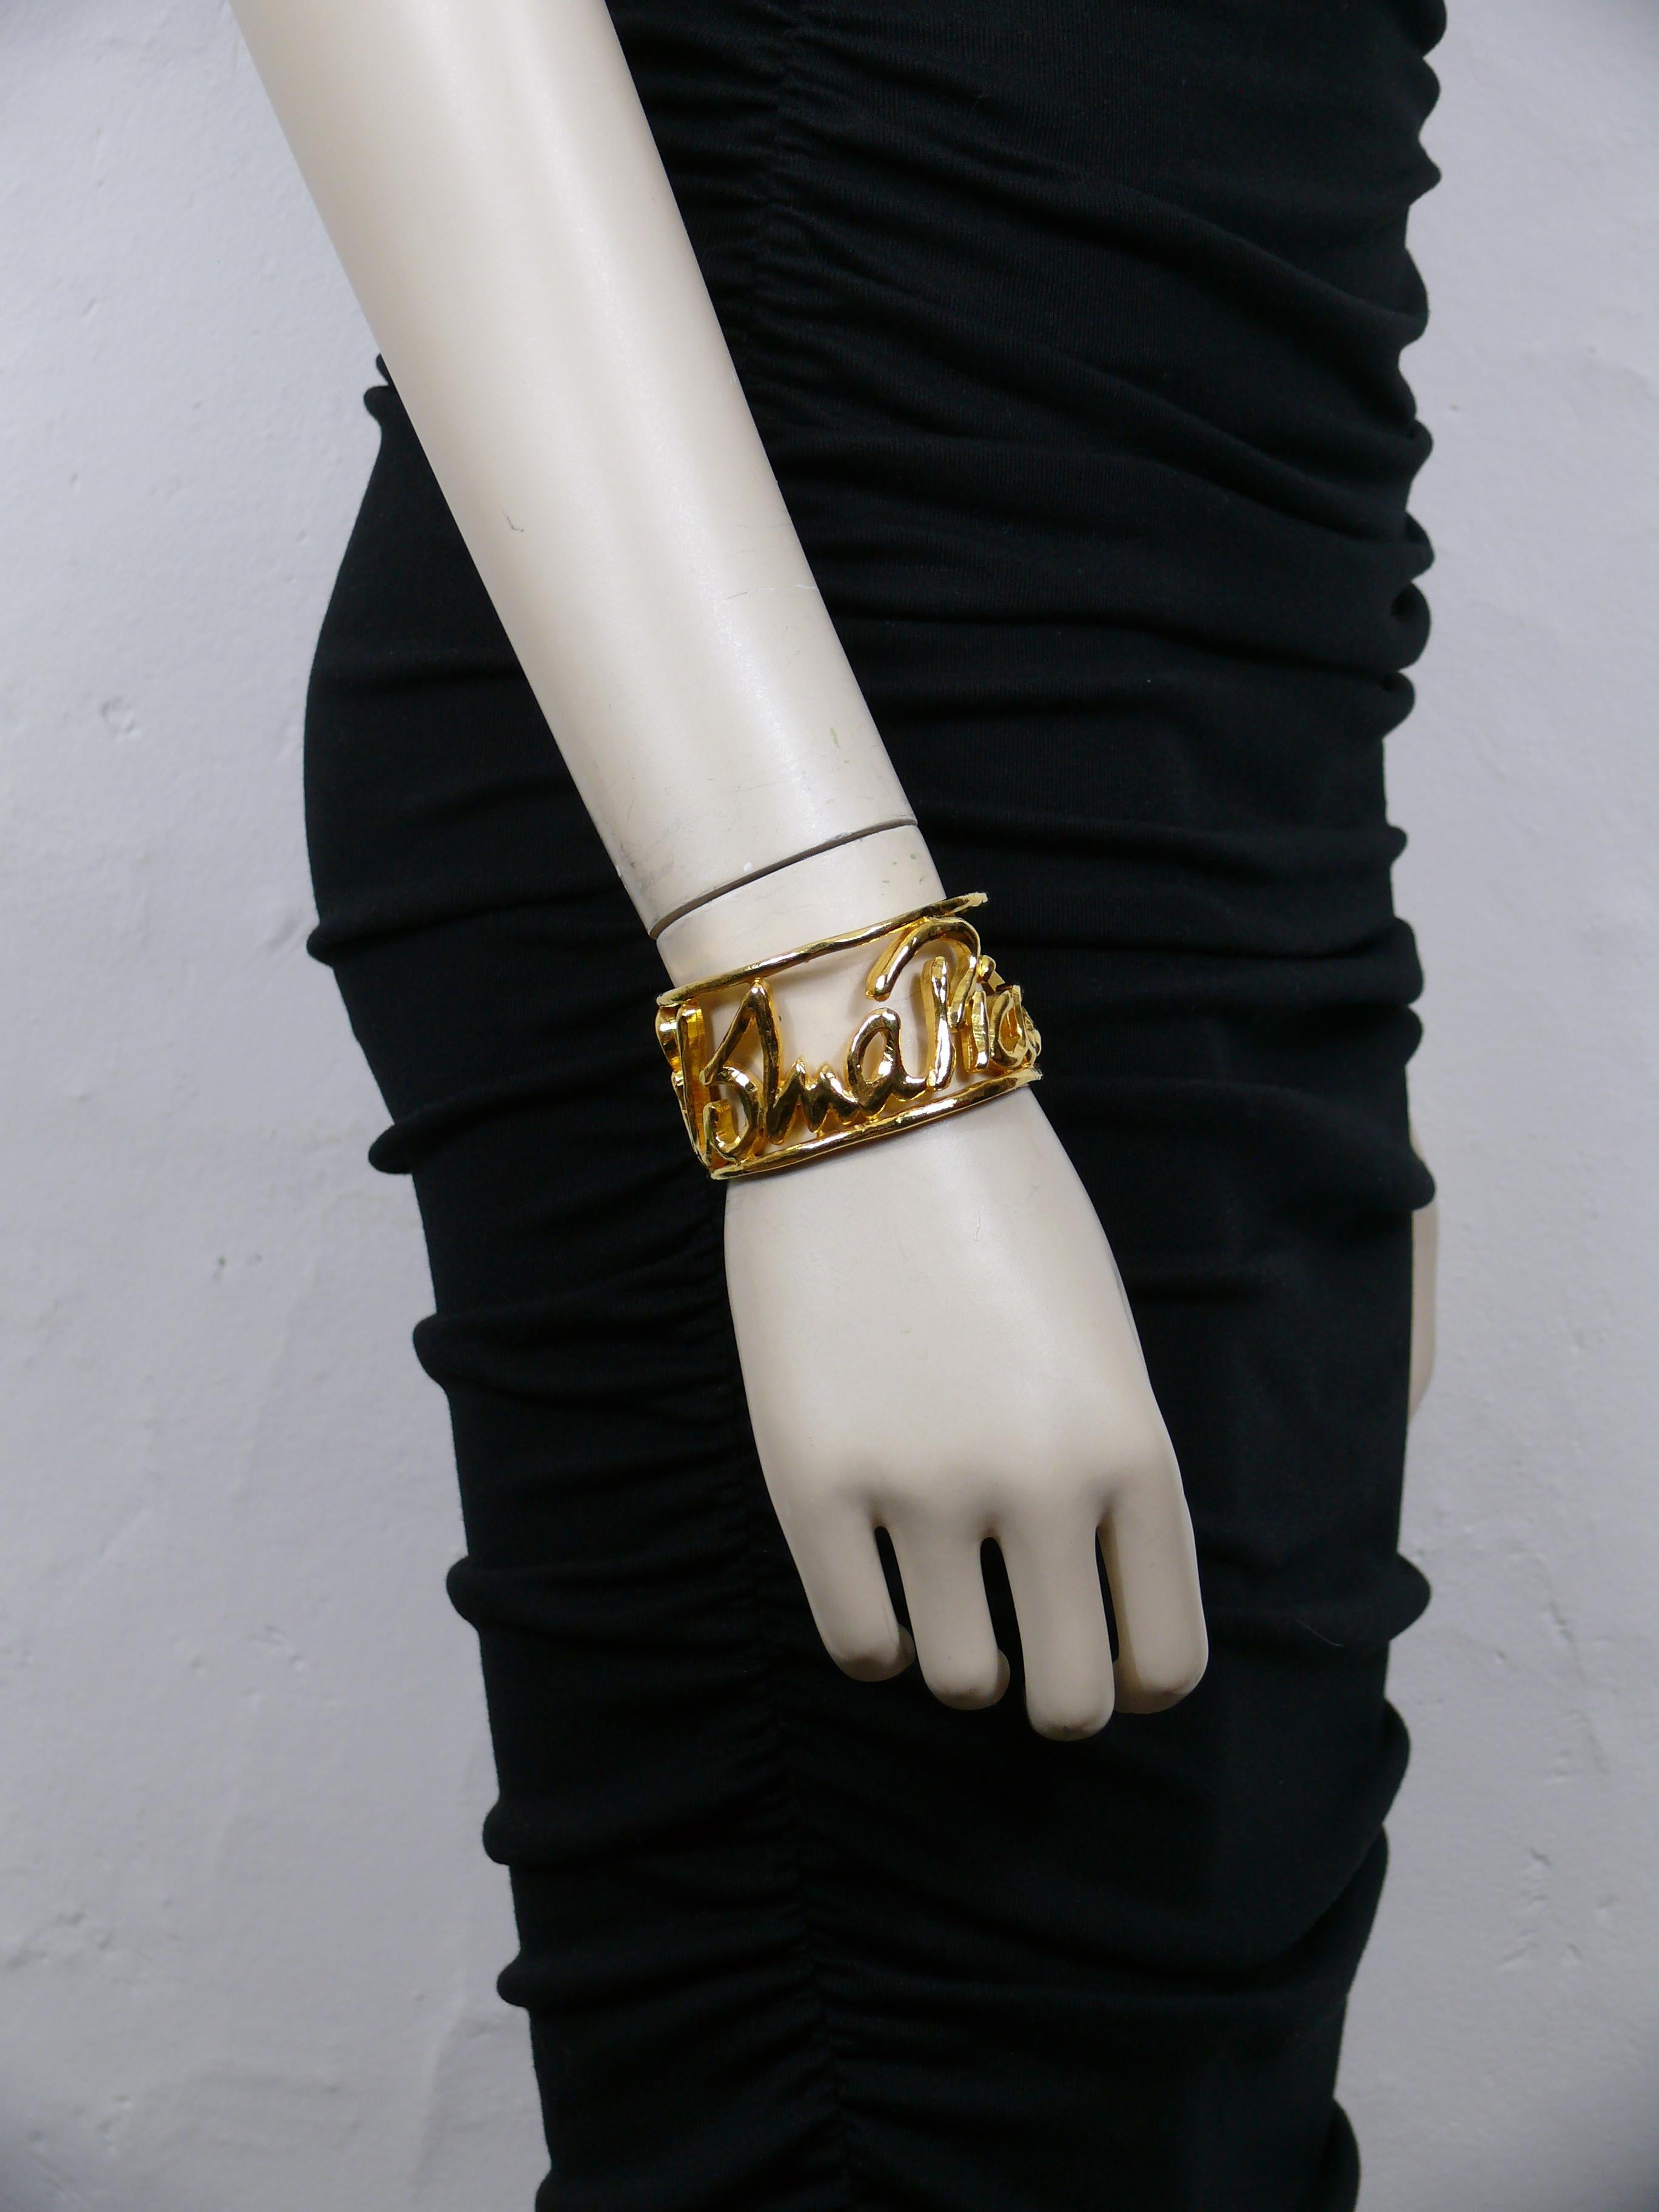 PALOMA PICASSO Parfums vintage gold tone cuff bracelet featuring PALOMA PICASSO openwork cursive signature.

Promotional PALOMA PICASSO parfums.

Unmarked.

Indicative measurements : inner circumference approx. 17.59 cm (6.93 inches) / width approx.